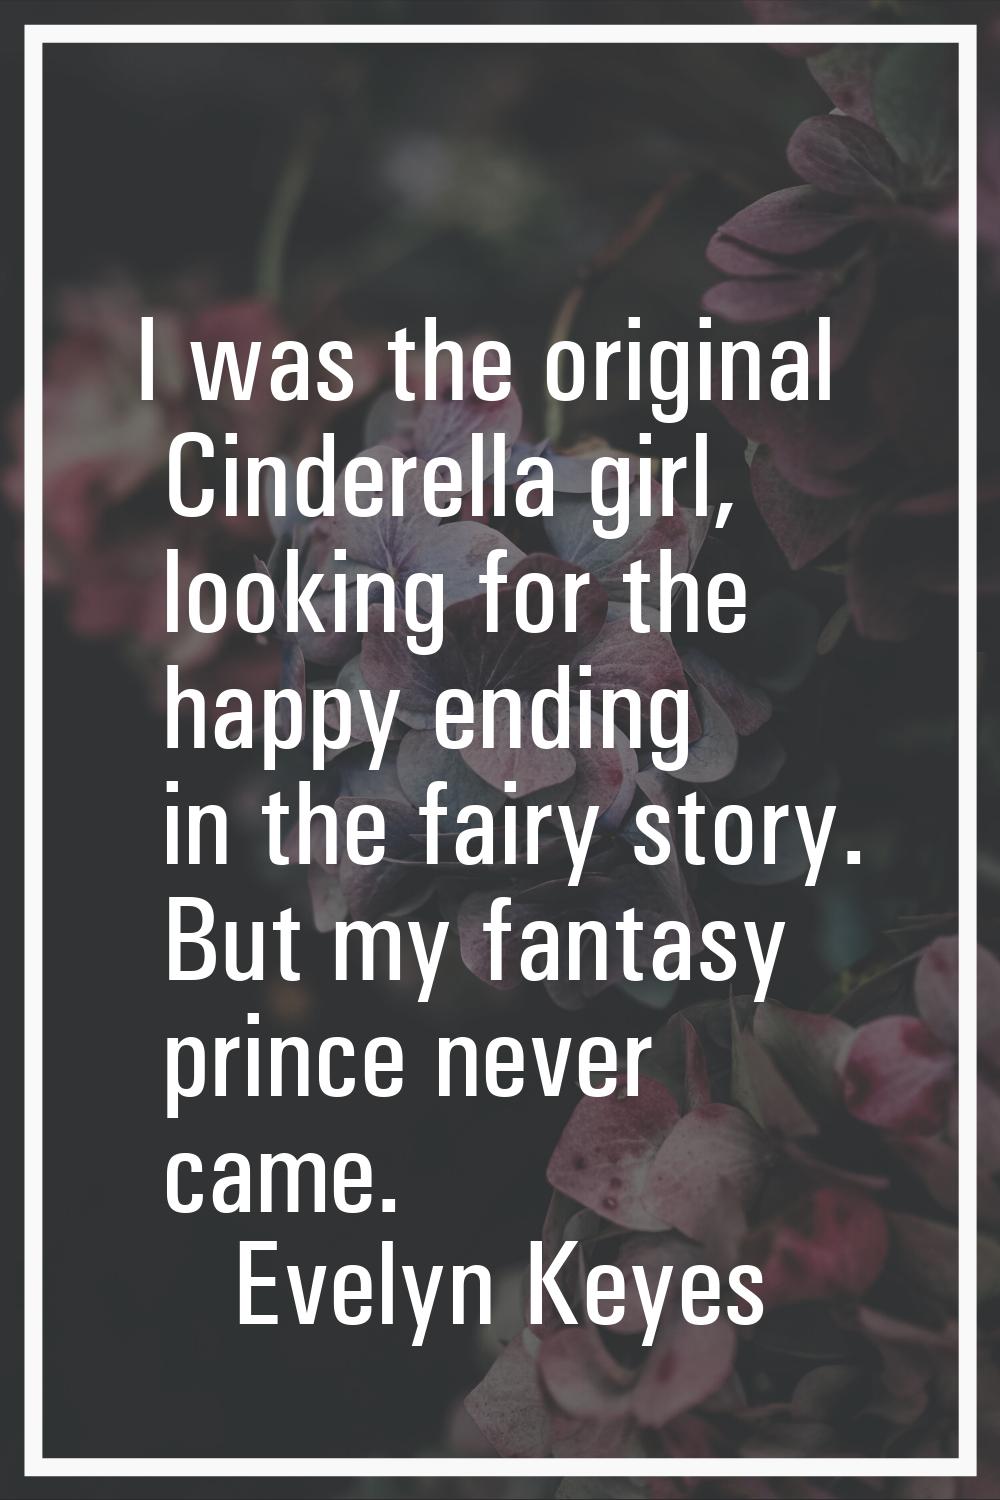 I was the original Cinderella girl, looking for the happy ending in the fairy story. But my fantasy